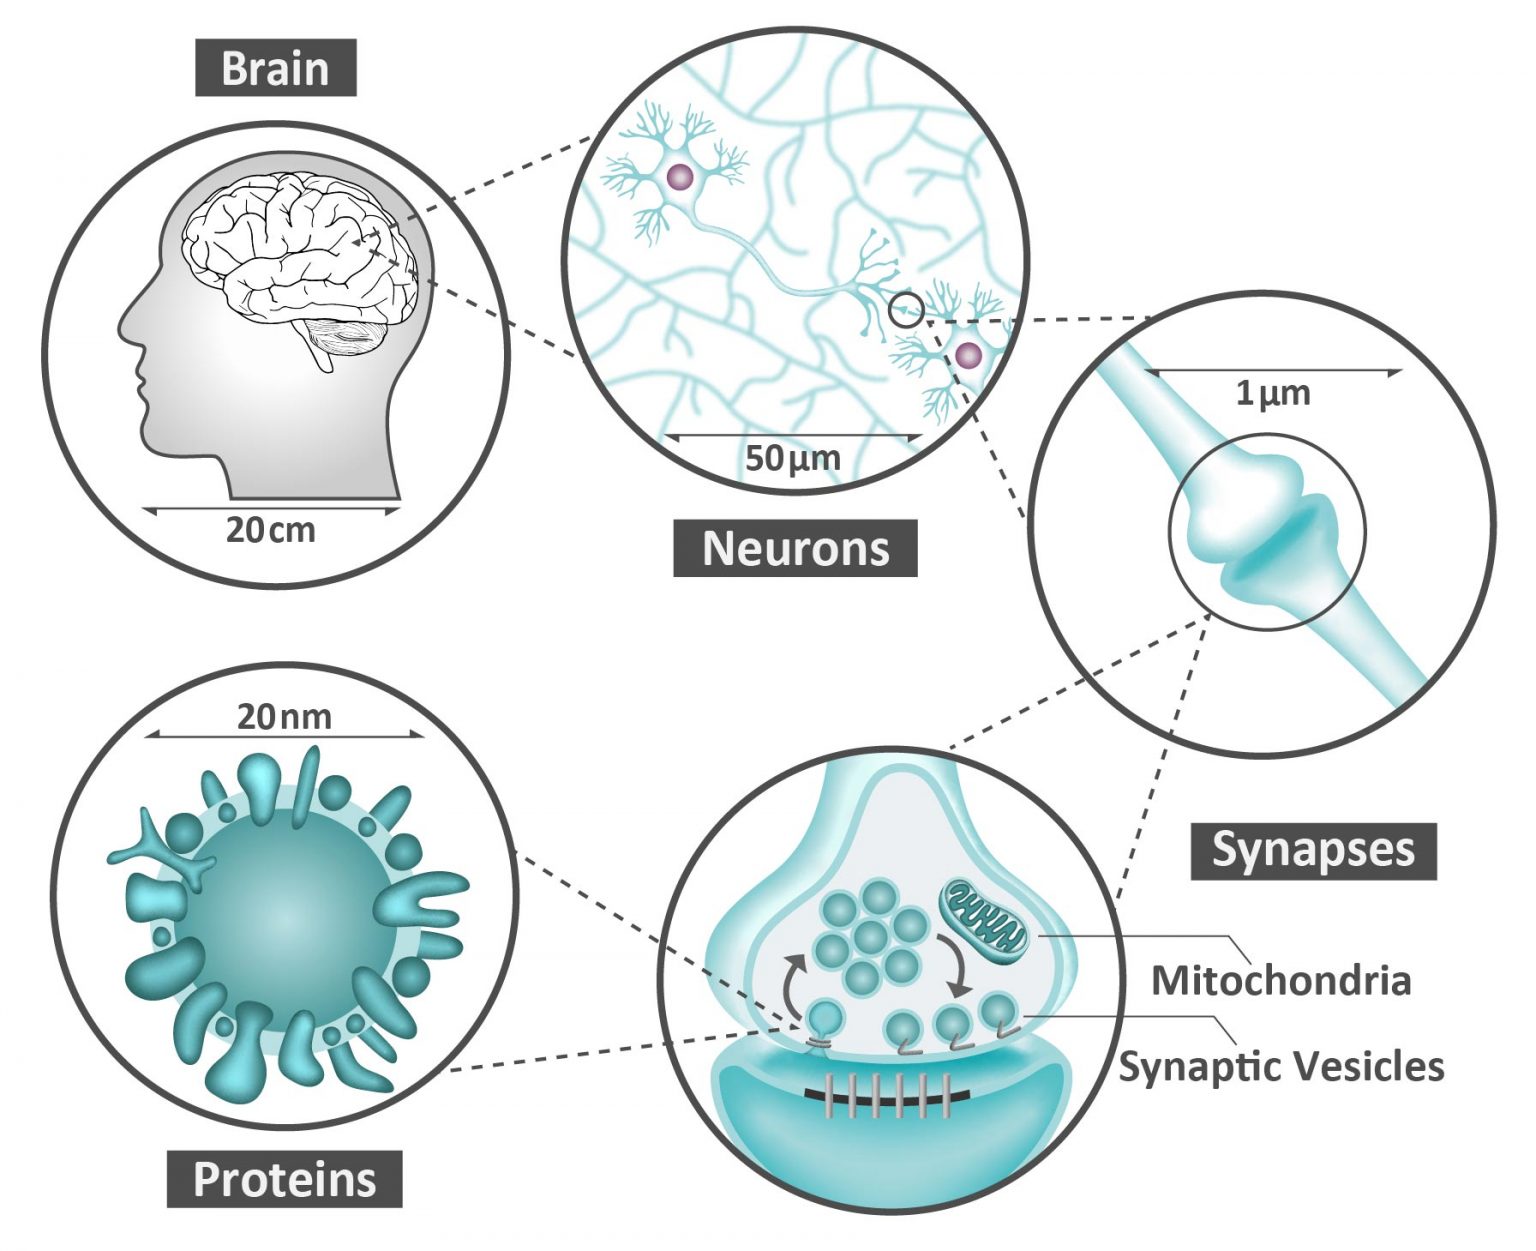 Illustration of neurons and synapses in the brain